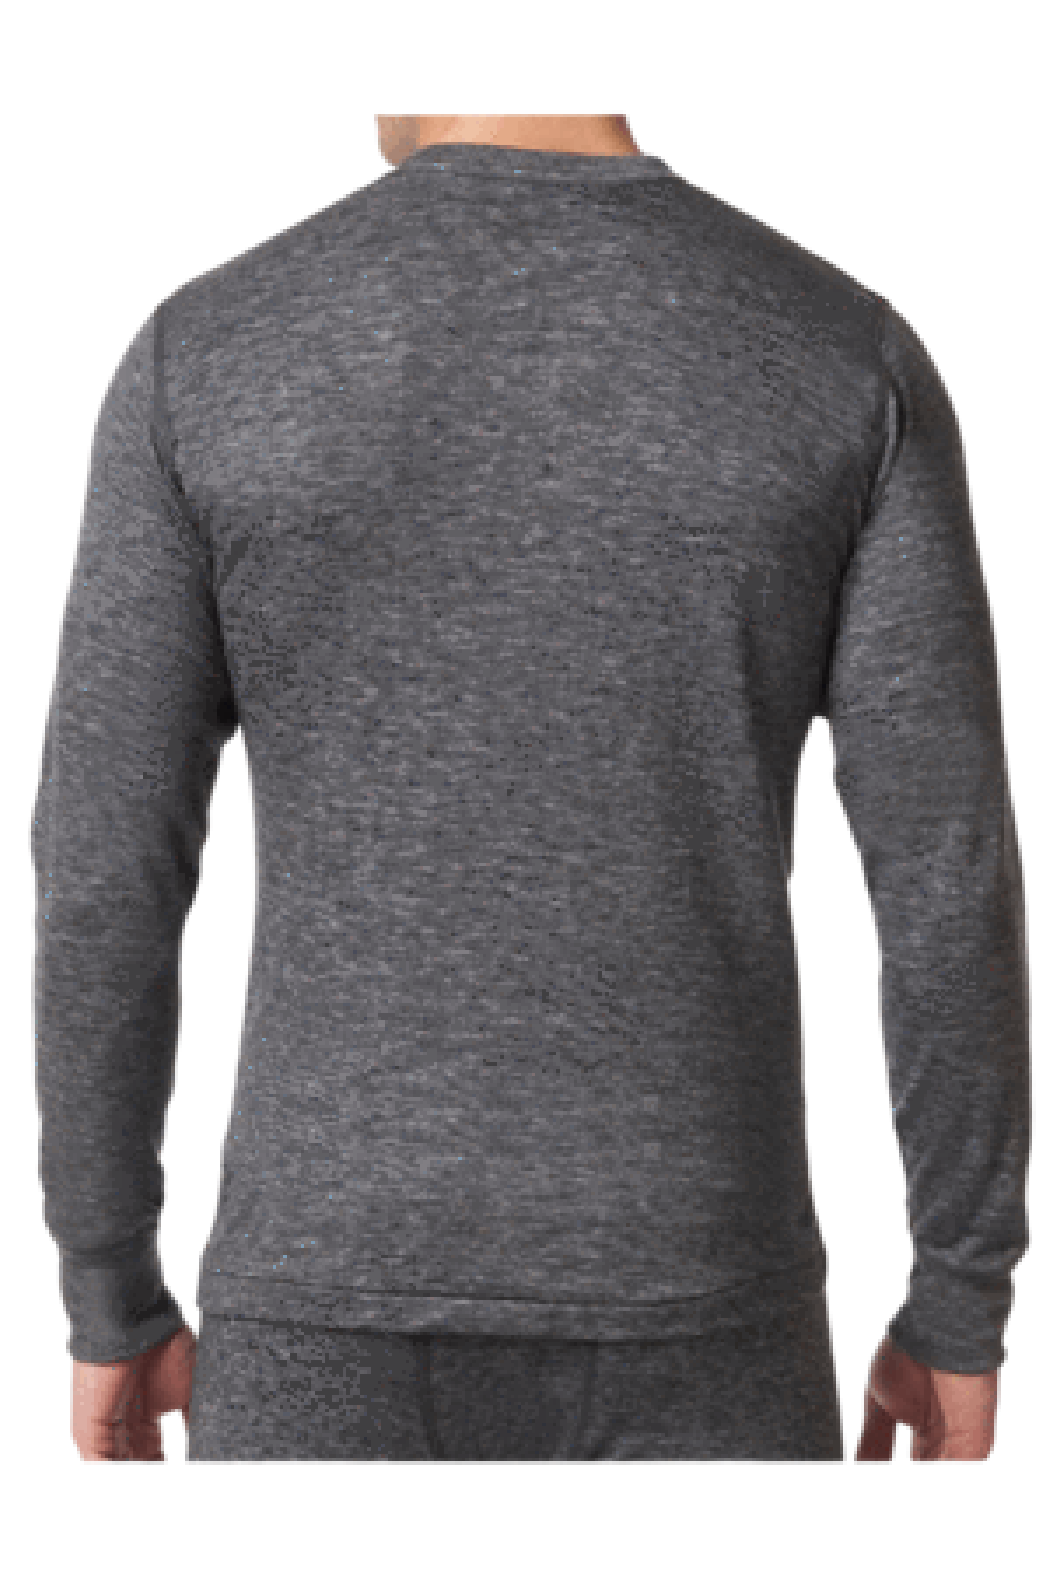 Two-Layer Wool Blend Base Layer